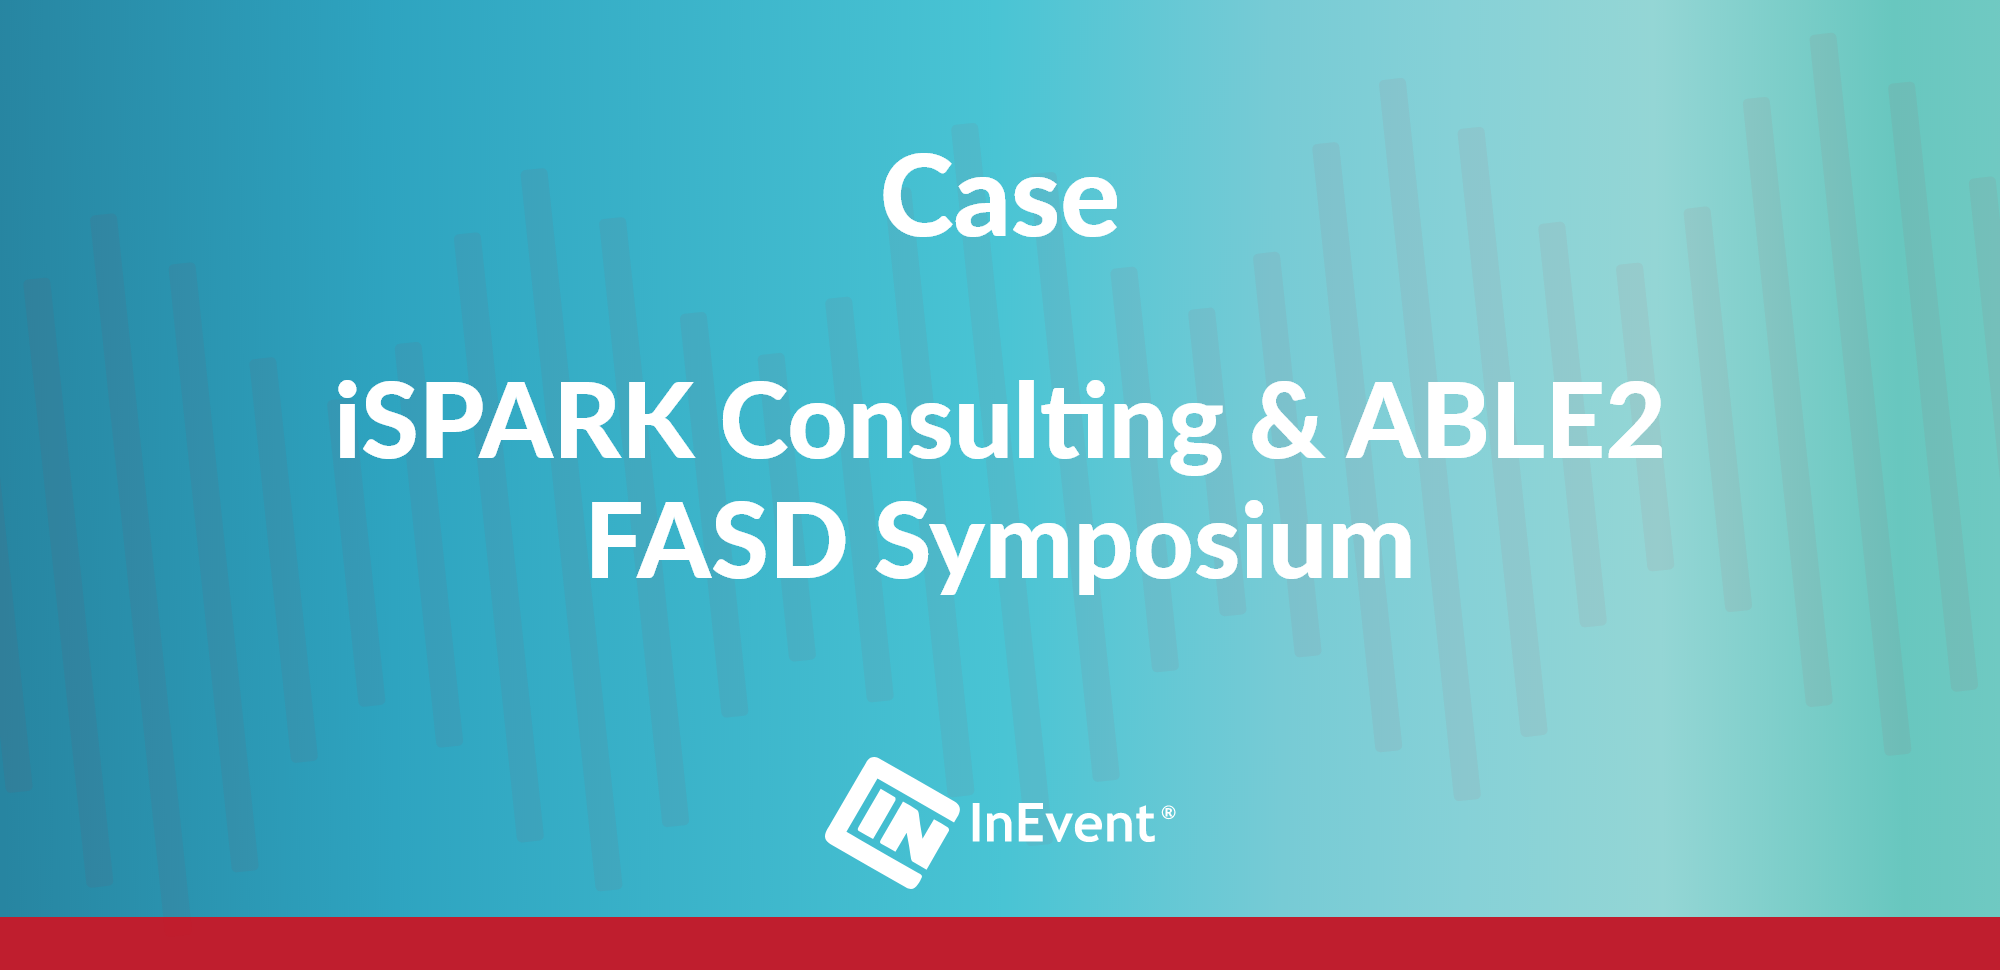 iSPARK Consulting & ABLE2 - FASD-Symposium